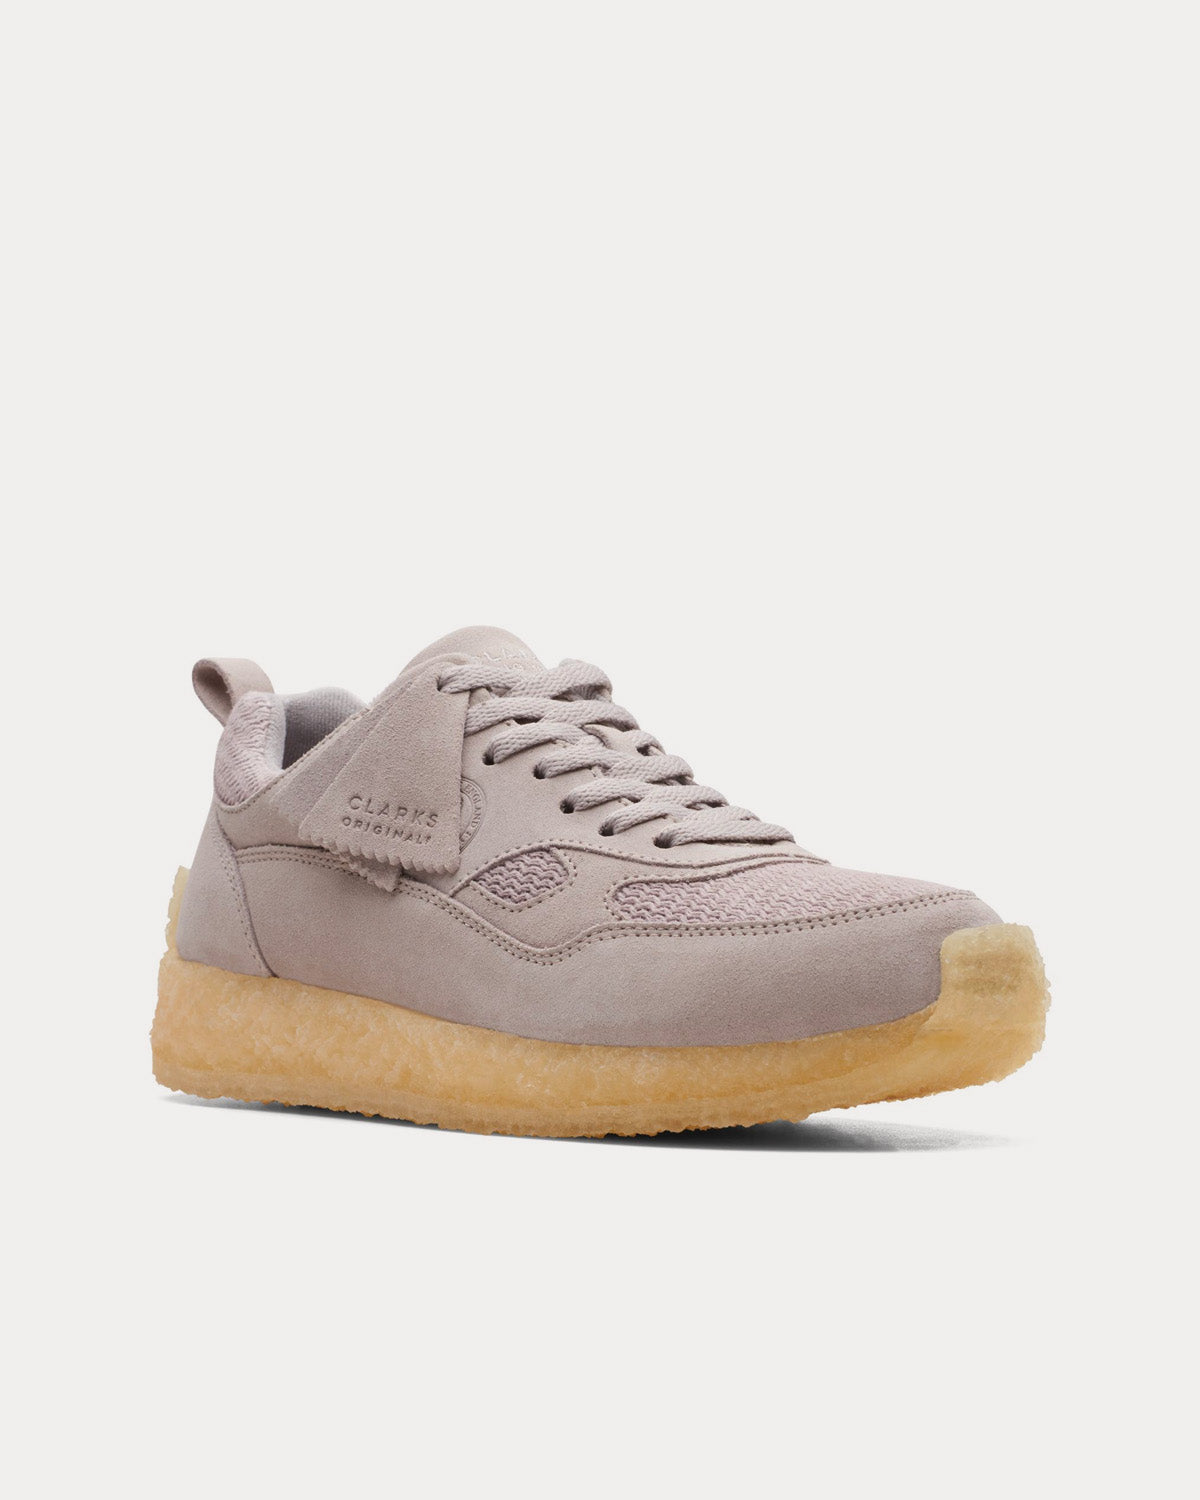 Clarks x Kith - Lockhill Grey Suede Low Top Sneakers